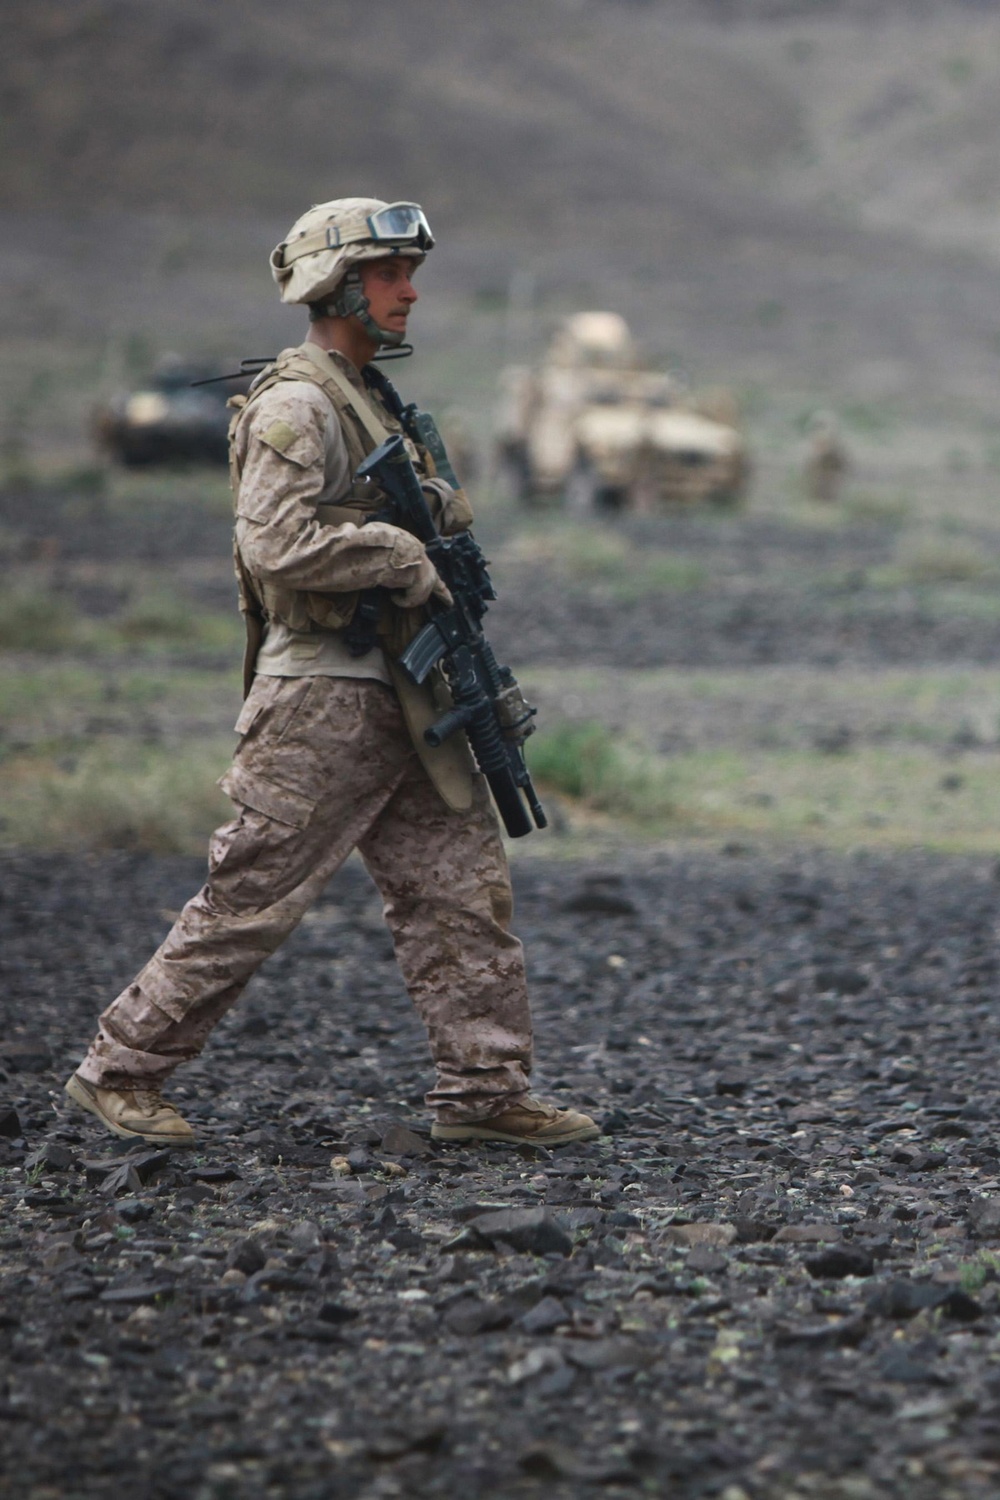 Fire and Forget: Lance corporal’s leadership stems from hard work, discipline